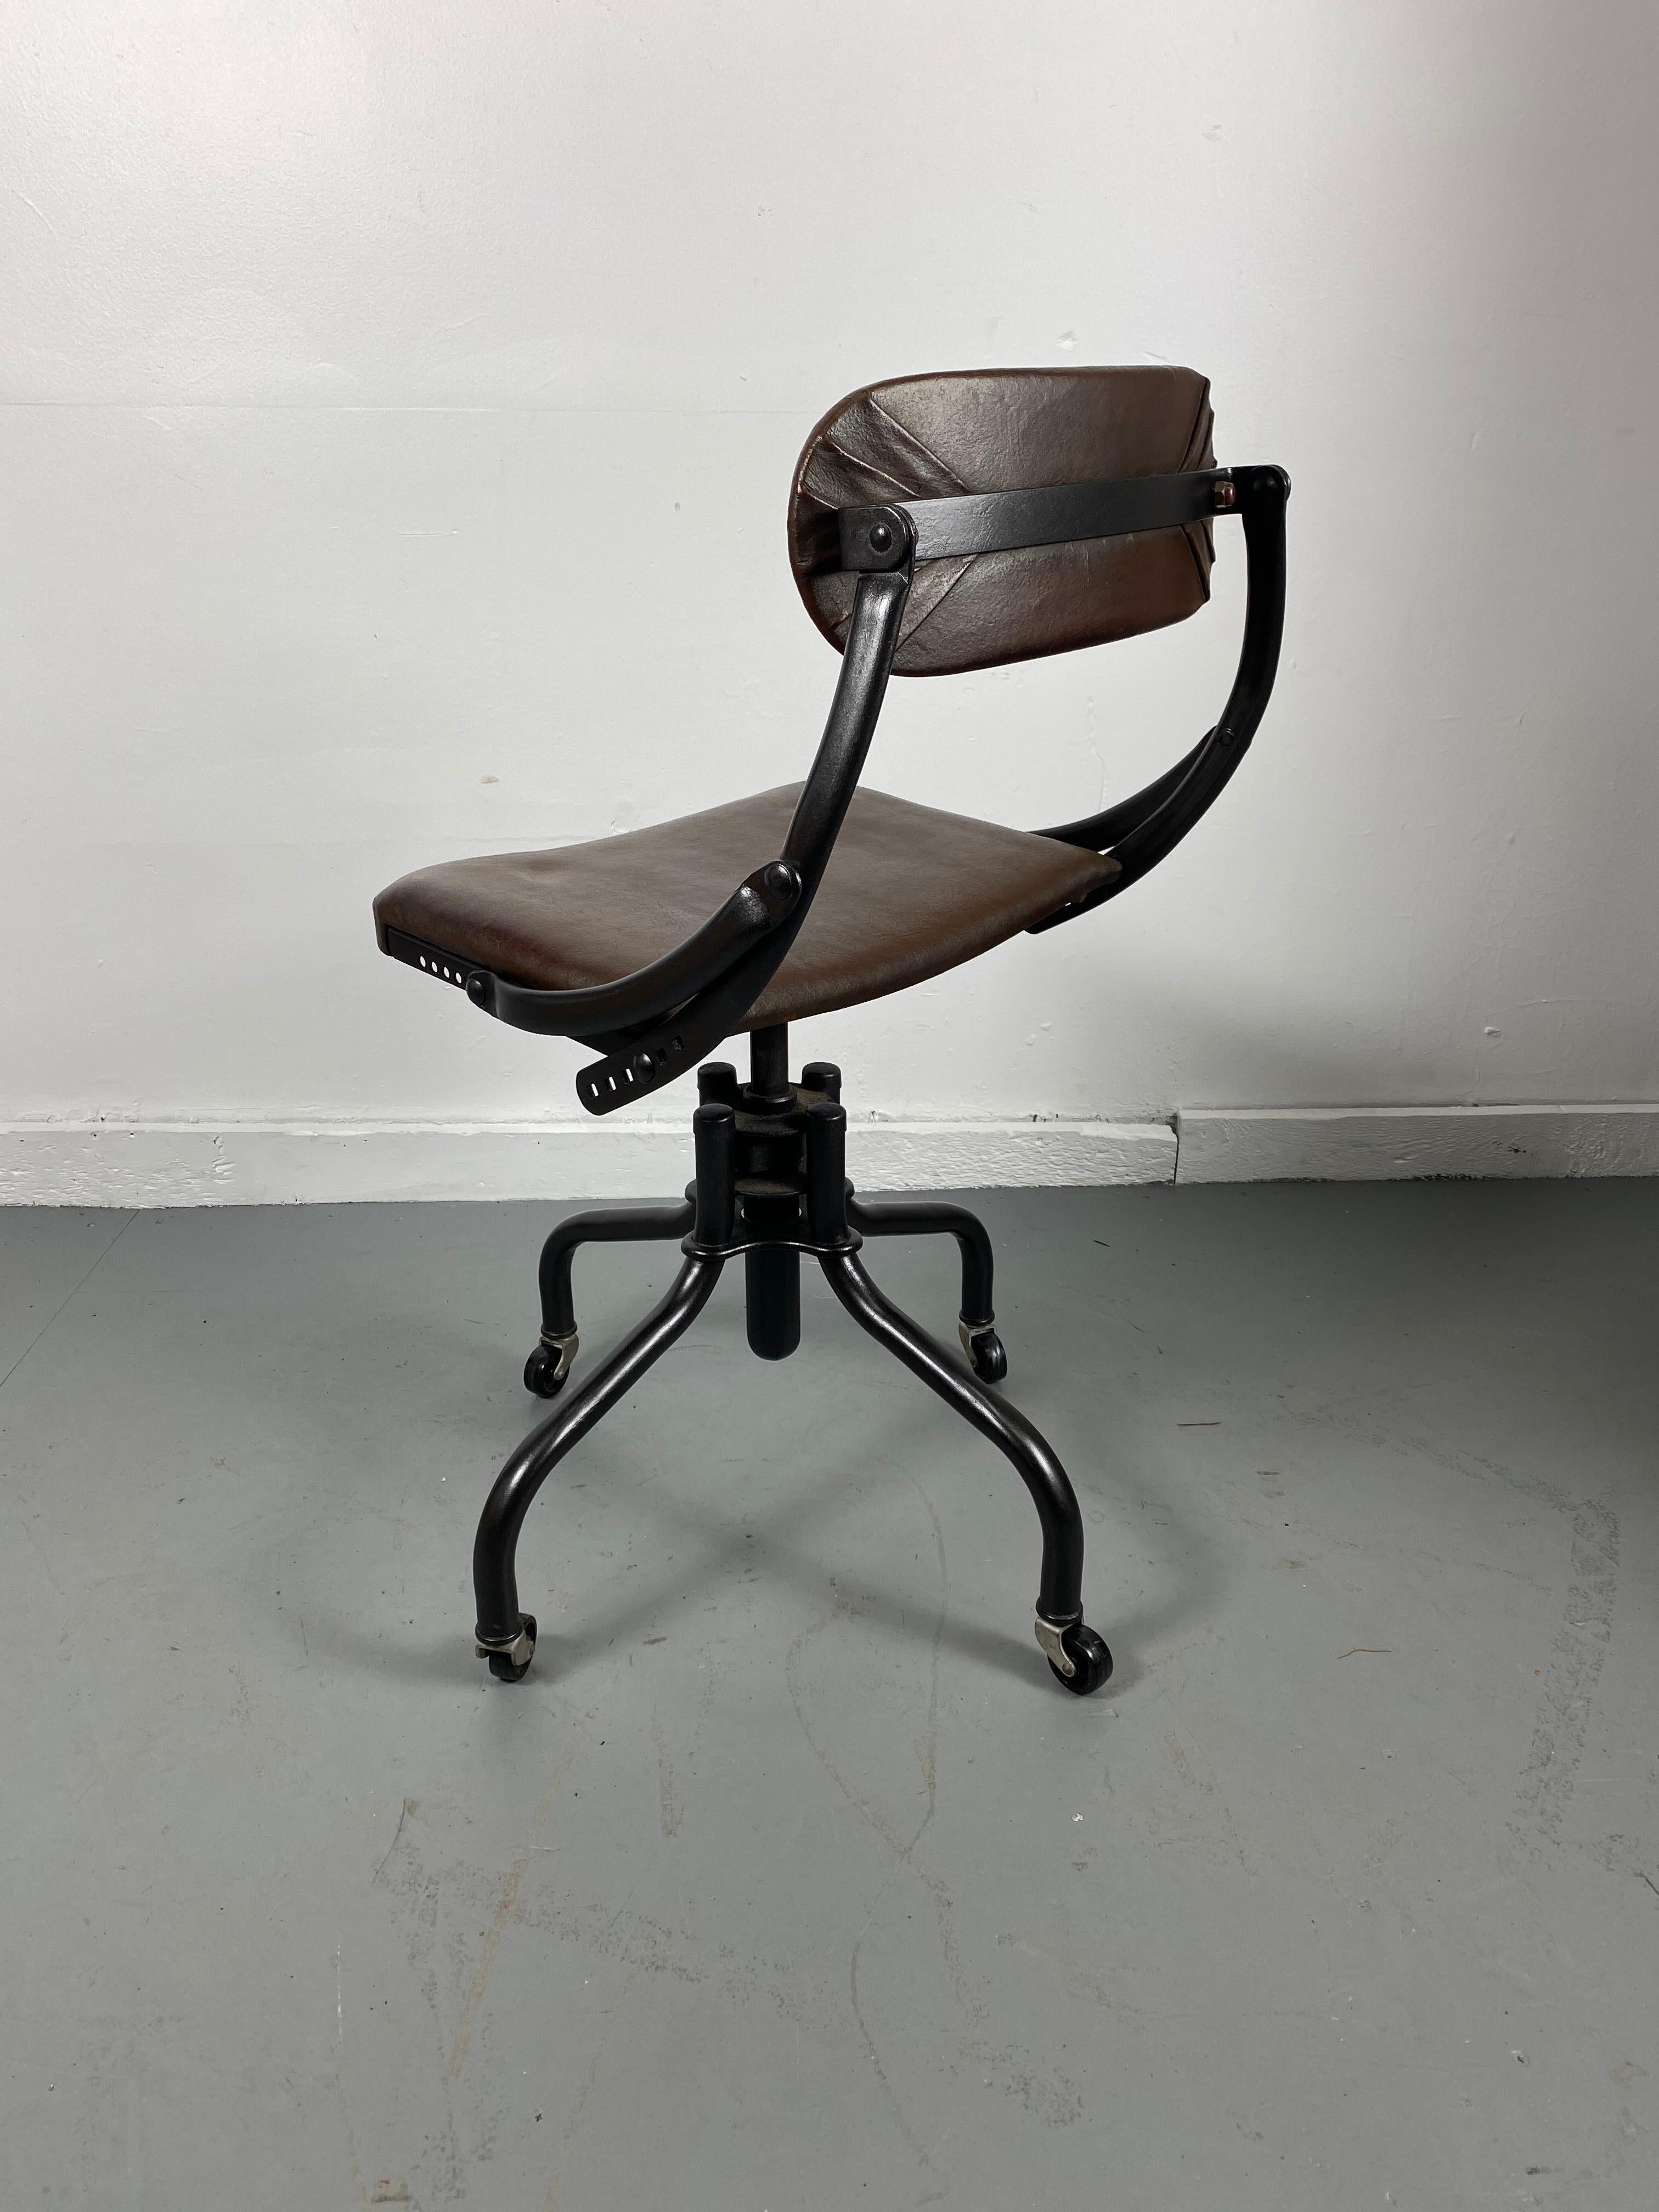 Painted 1930s Industrial Swivel Task / Desk Chair Manufactured by Do/ More, Art Deco